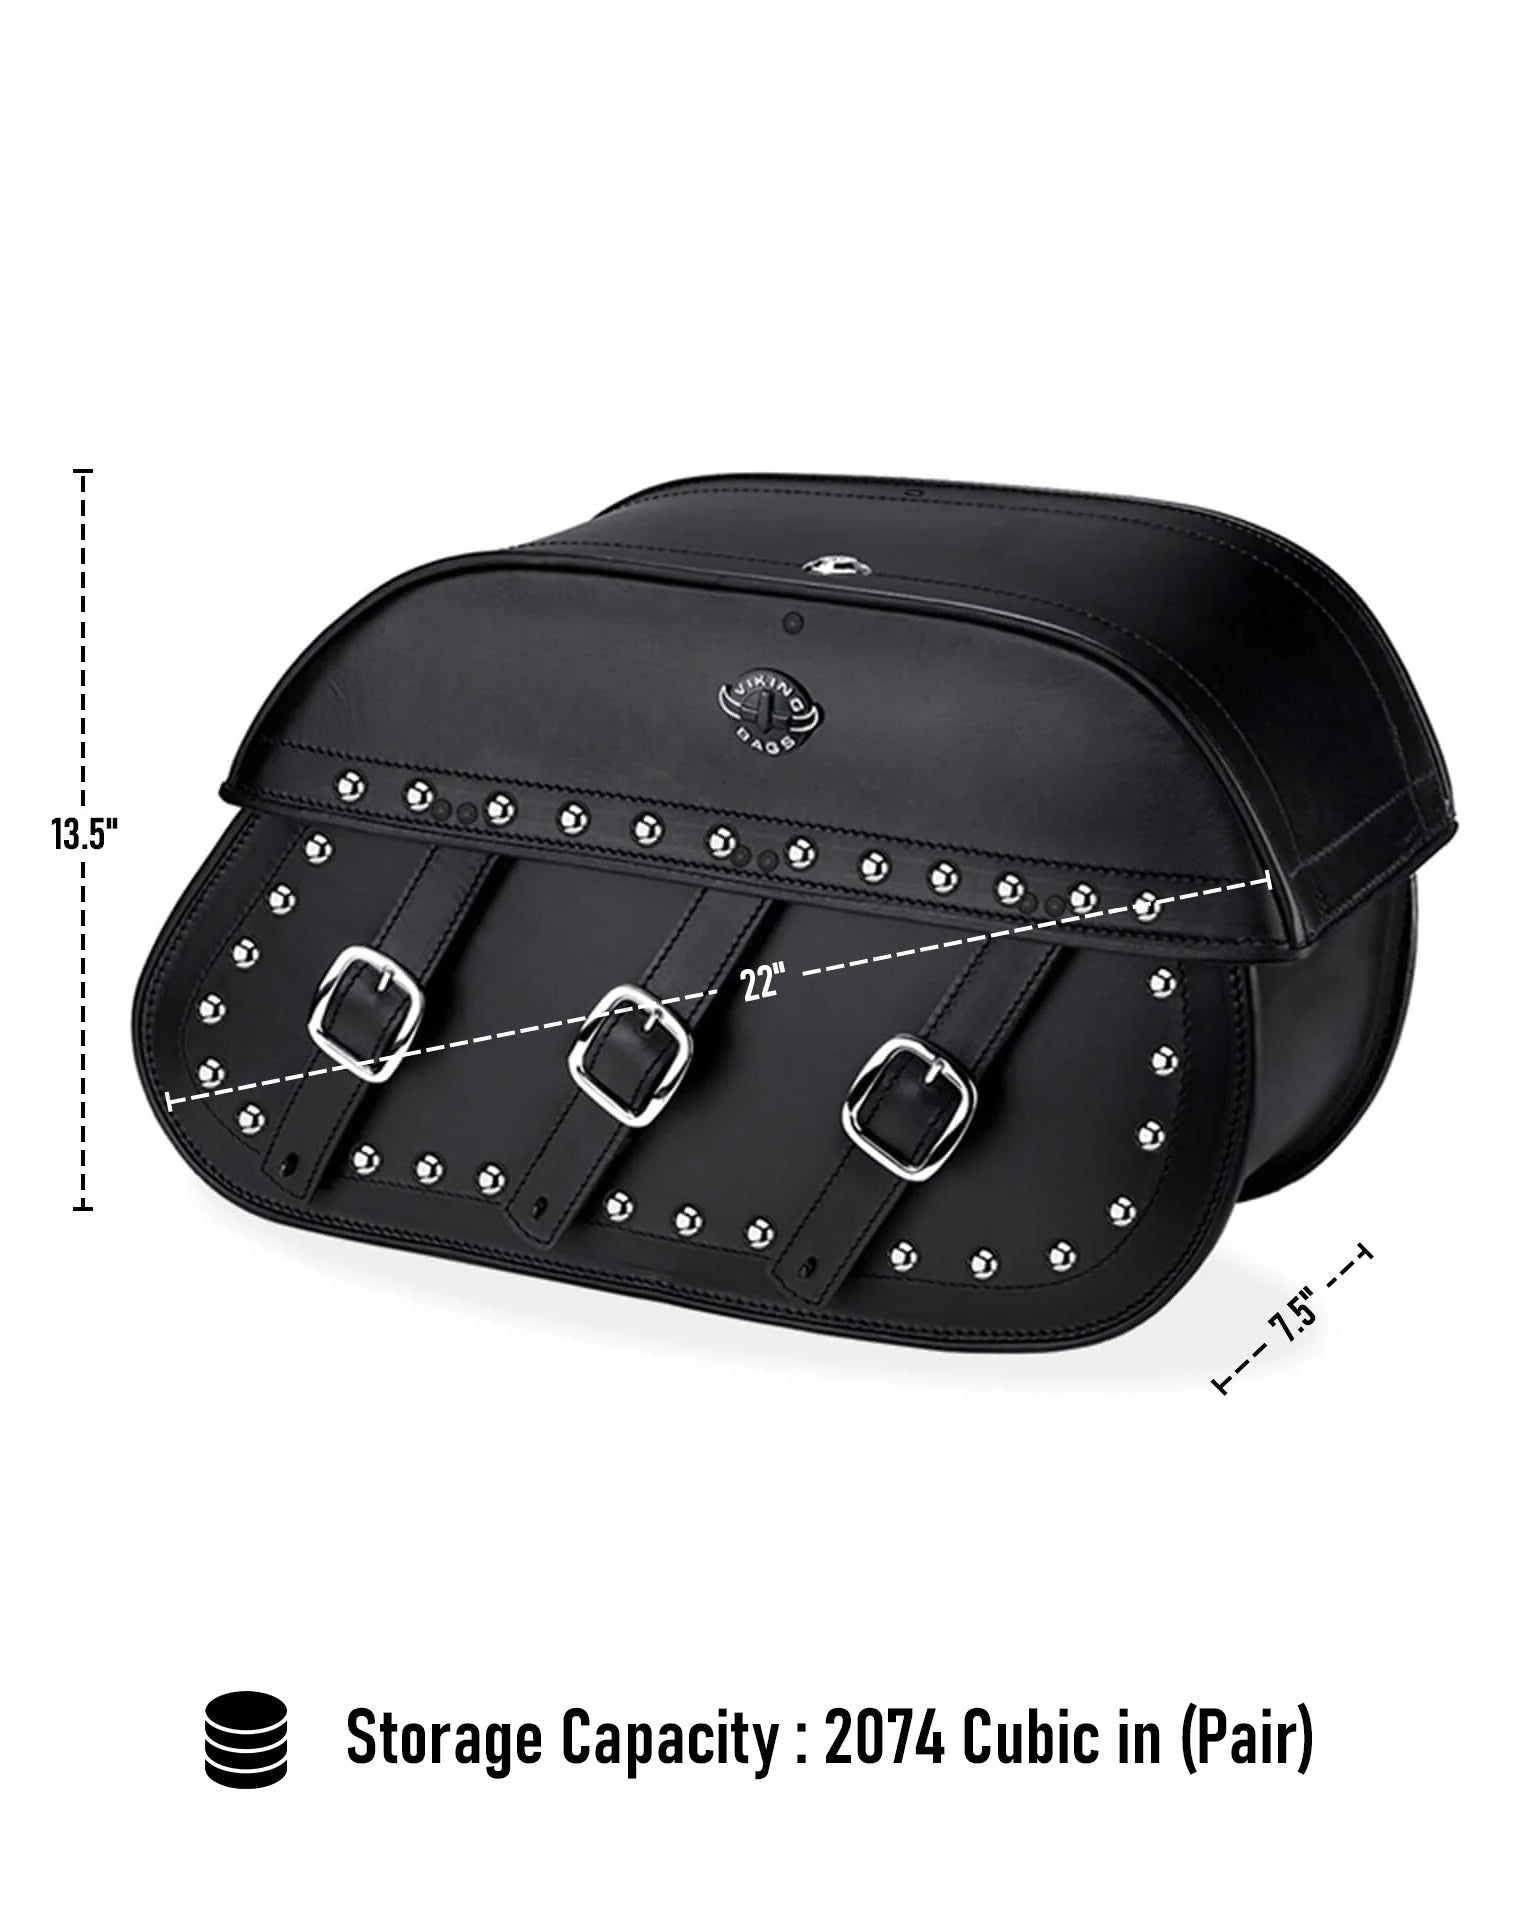 Viking Trianon Extra Large Victory Boardwalk Studded Leather Motorcycle Saddlebags Can Store Your Ridings Gears